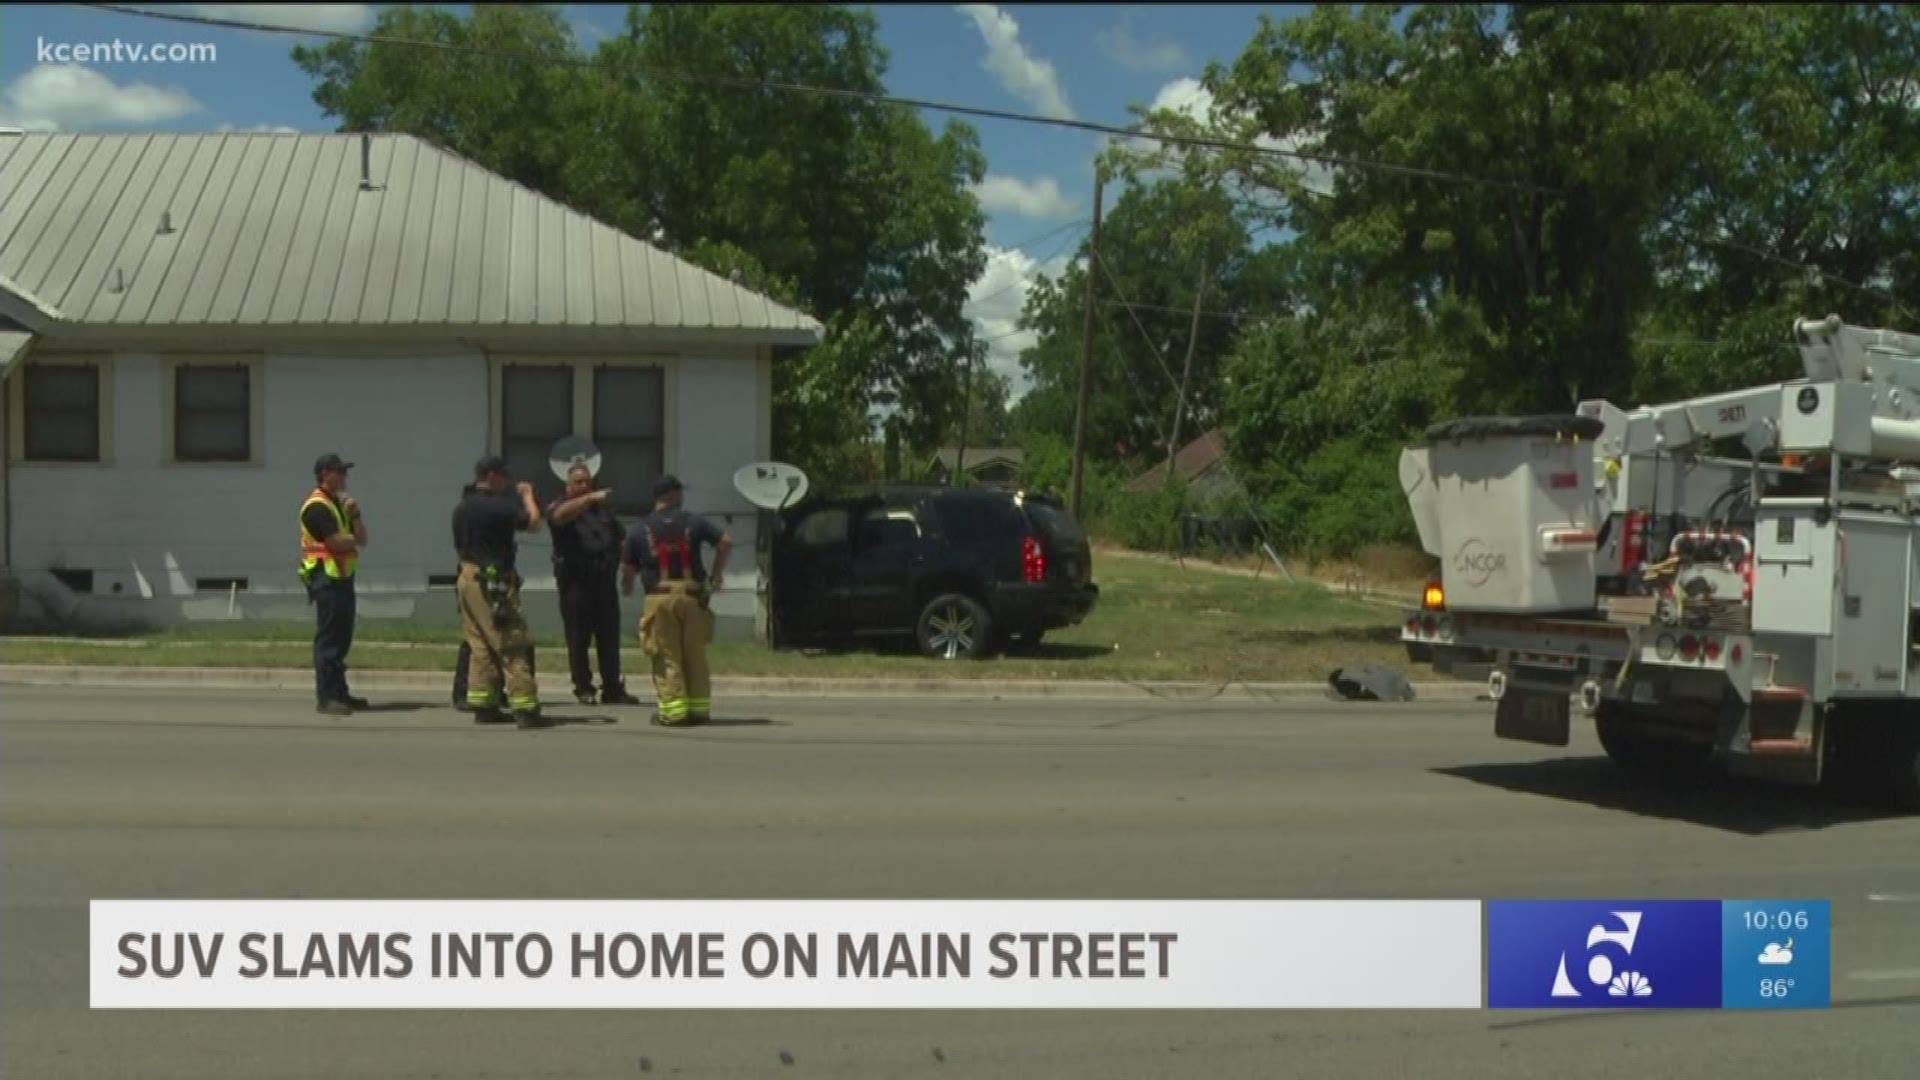 Two people were taken to the hospital after their SUV slammed into a home in the 700 block of Main Street in Temple. 